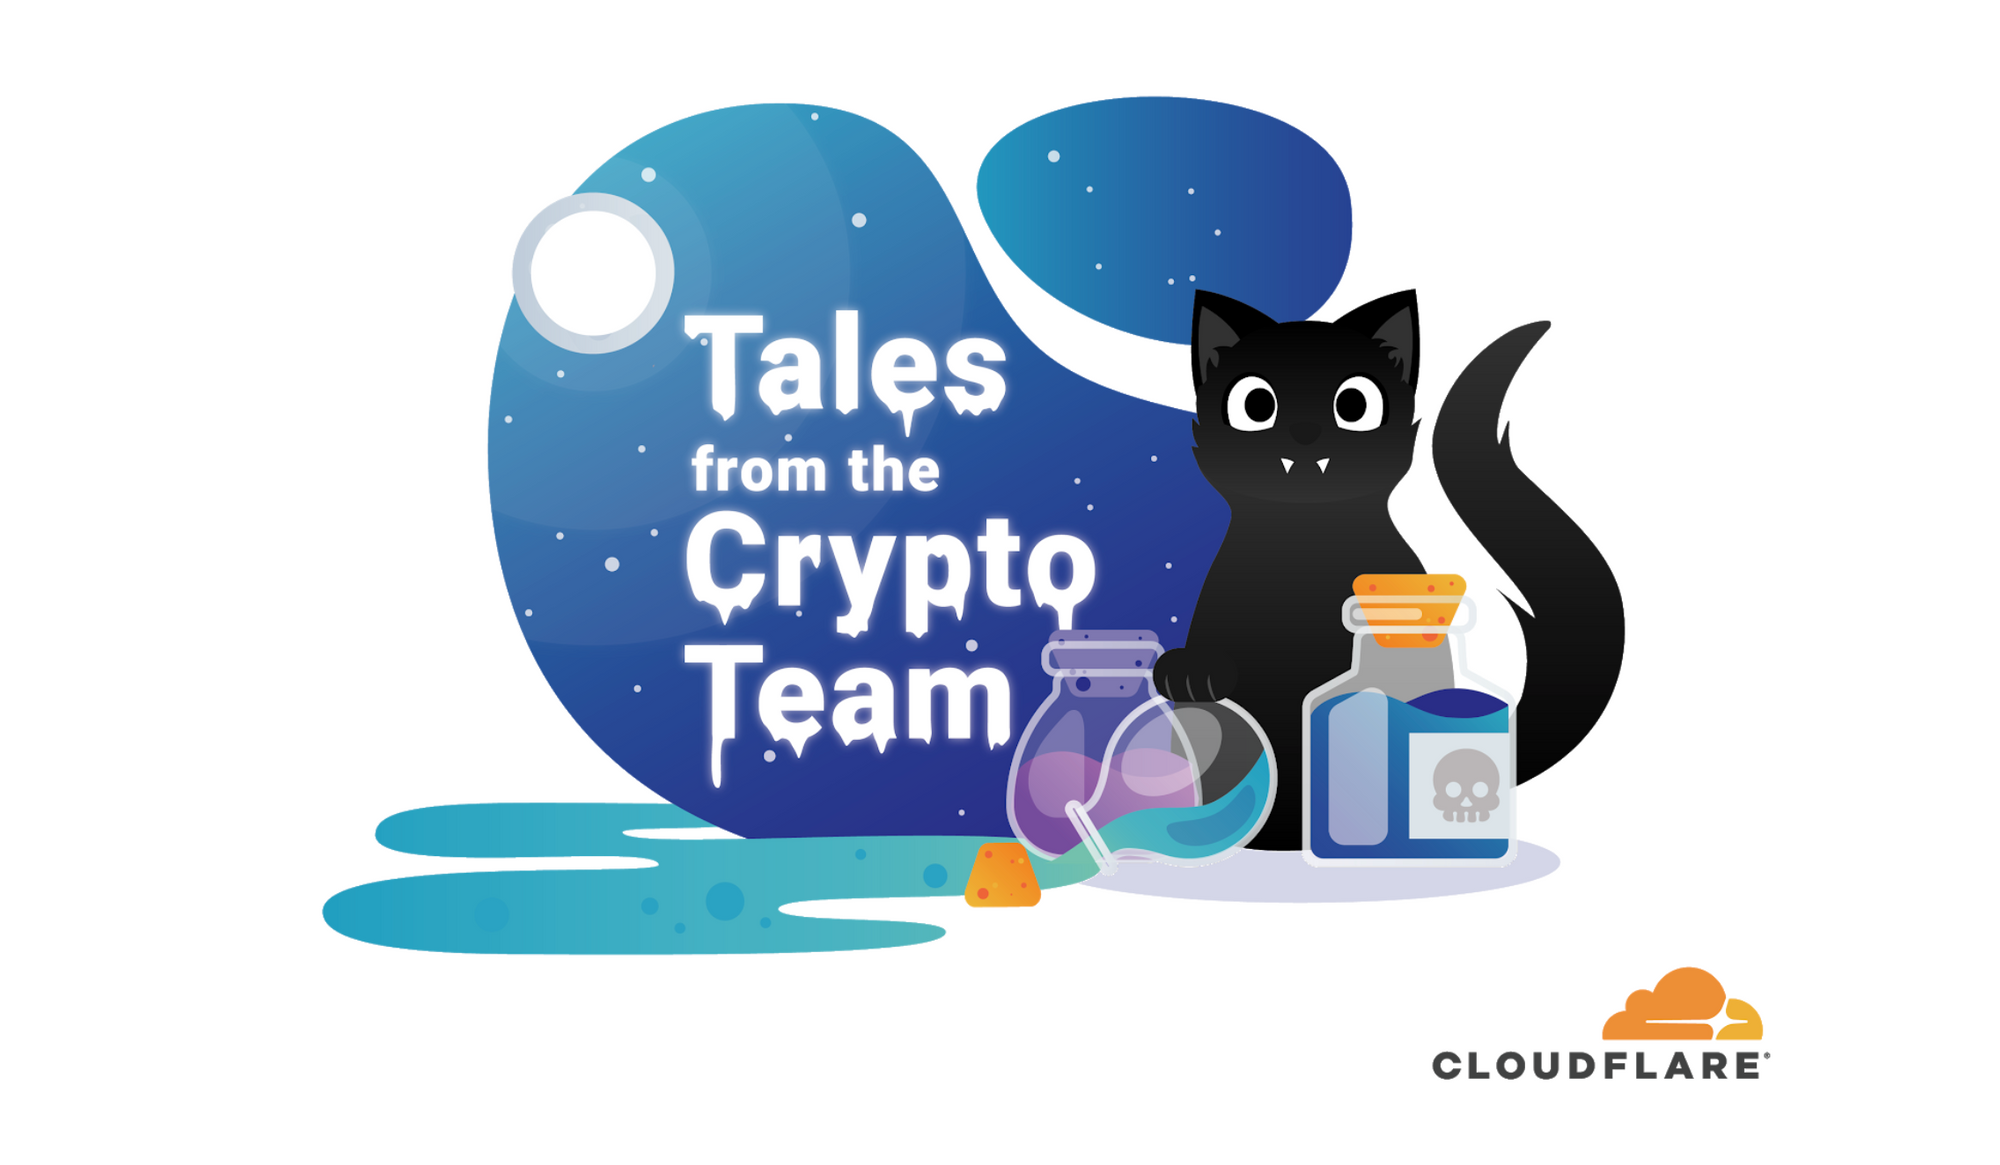 Tales from the Crypt(o team)